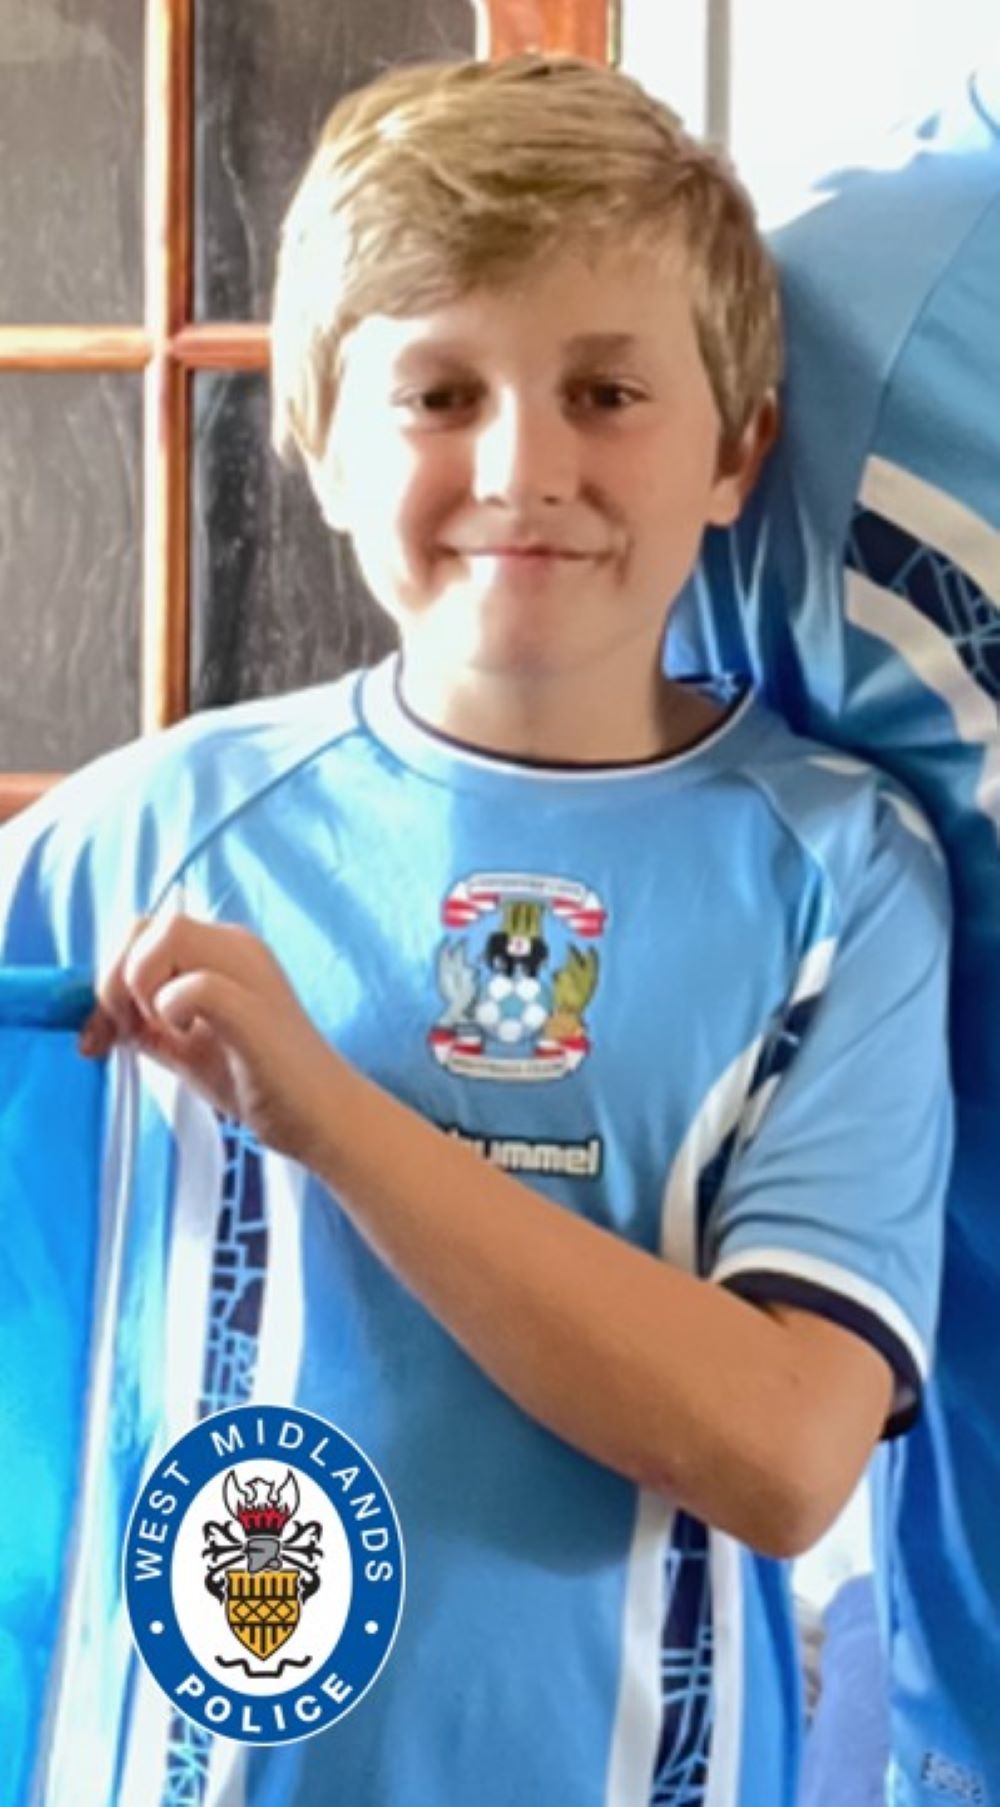 Keaton Slater smiling and wearing a Coventry City football shirt